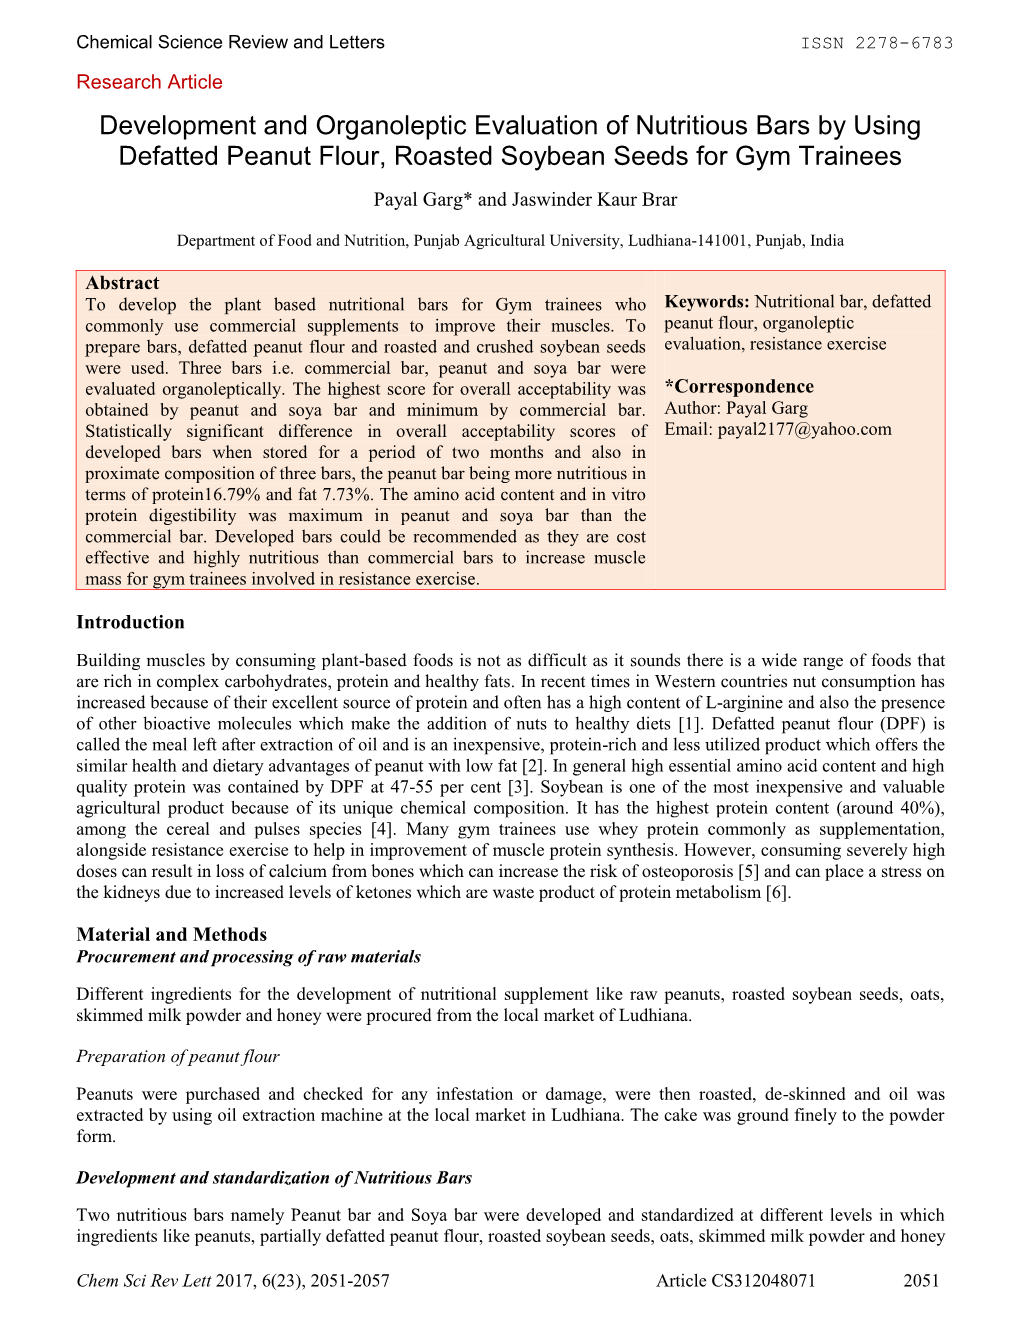 Development and Organoleptic Evaluation of Nutritious Bars by Using Defatted Peanut Flour, Roasted Soybean Seeds for Gym Trainees Payal Garg* and Jaswinder Kaur Brar